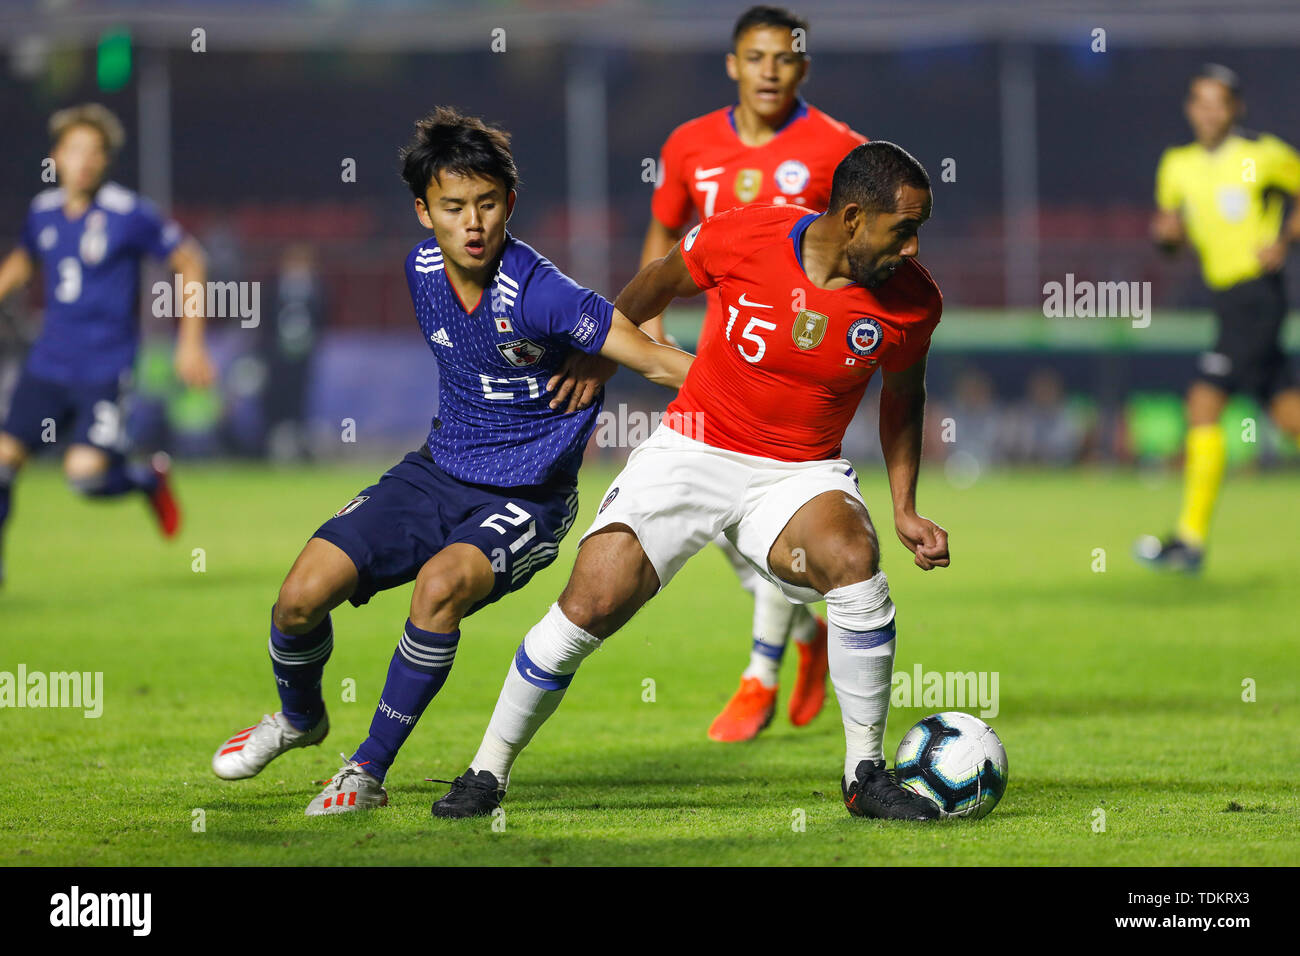 Sao Paulo, Brazil. 17th June, 2019. Sao Paulo, Brazil. 17th June, 2019. Takefusa Kubo and Beausejour during a match between Japan and Chile, valid for the group stage of the Copa América 2019, held this Monday (17) at the Morumbi Stadium in São Paulo, SP. (Photo: Ricardo Moreira/Fotoarena) Credit: Foto Arena LTDA/Alamy Live News Credit: Foto Arena LTDA/Alamy Live News Stock Photo